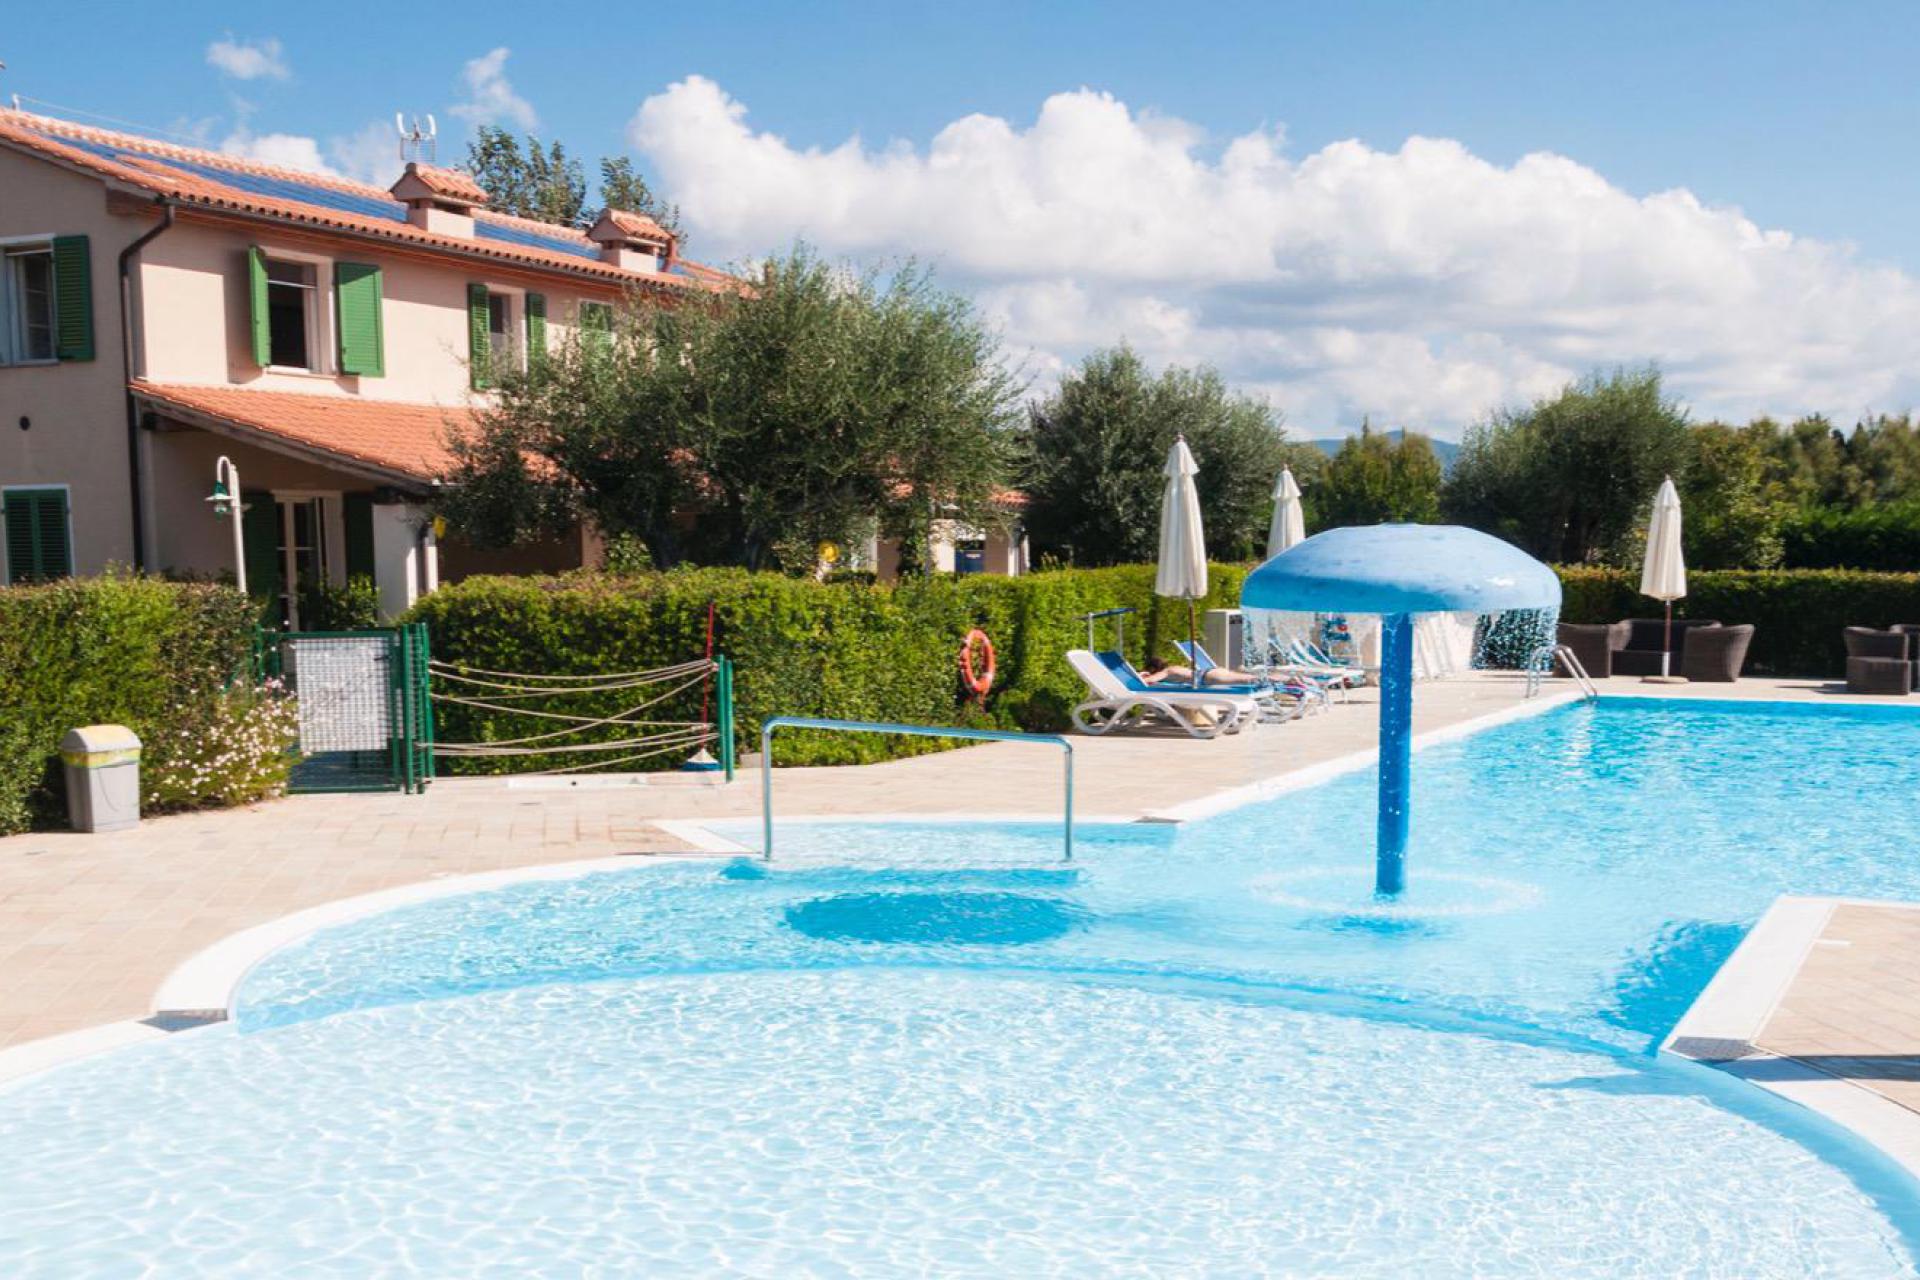 Cozy agriturismo 800 meters from the sea in Tuscany